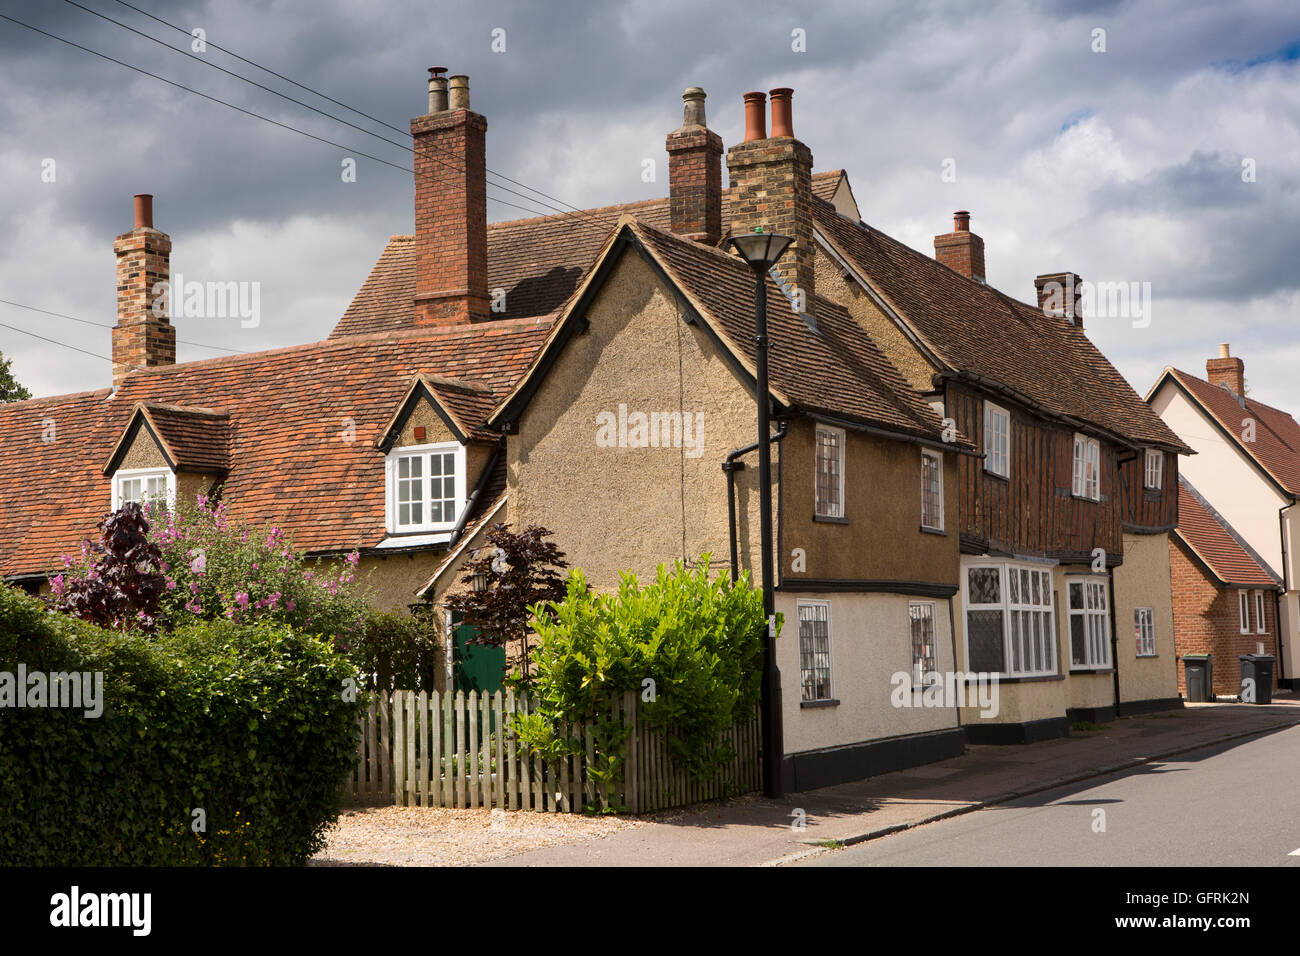 UK, England, Bedfordshire, Elstow, High Street, historic rendered, timber-framed house Stock Photo